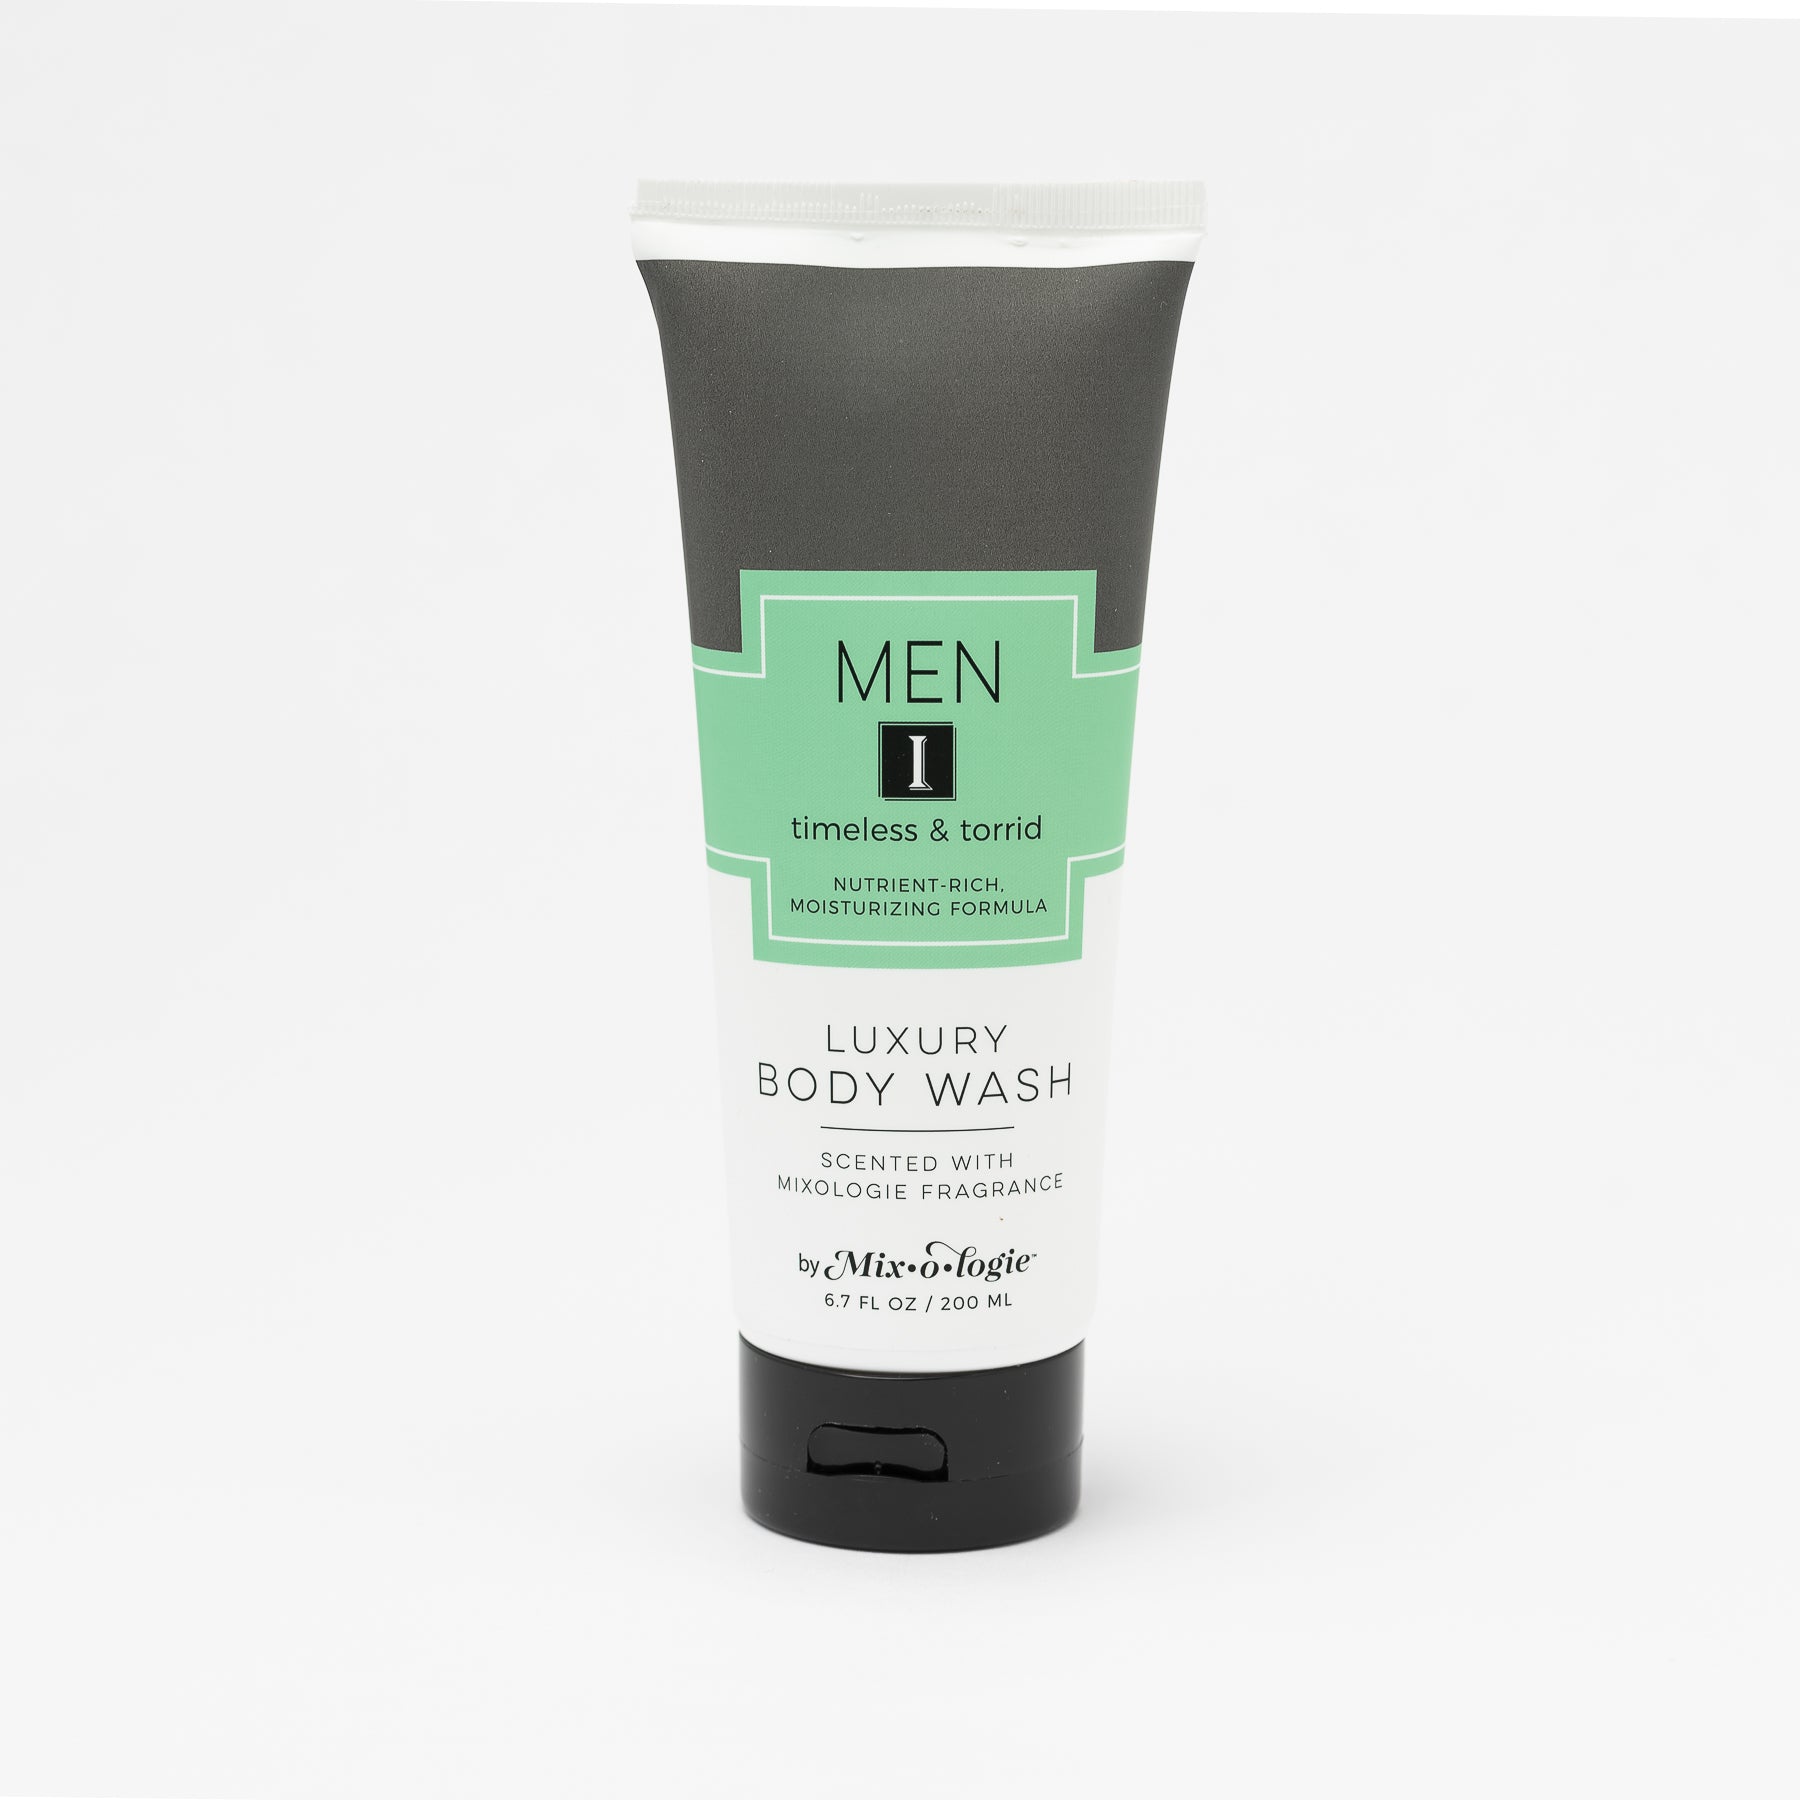 Luxury Body Wash in Mixologie’s Men’s I (Timeless & Torrid) in pale green color sample package with black label. Contains 6.7 fl oz or 200 mL pictured on a white background. 